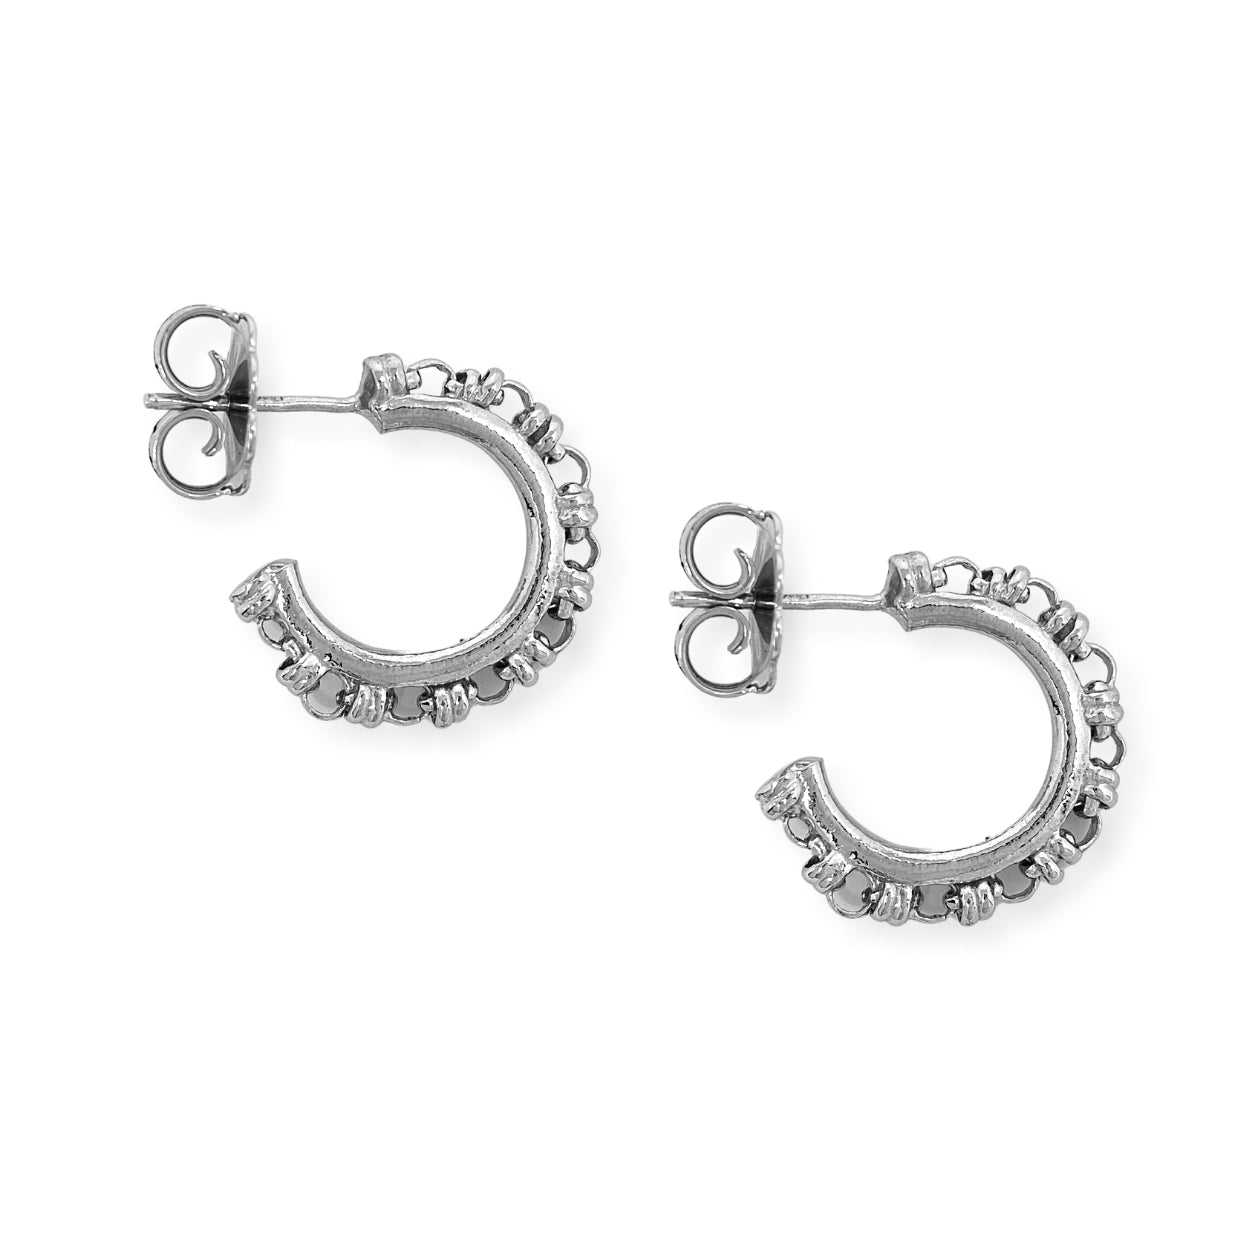 A closeup of silver hoop earrings designed and hand-crafted by DelBrenna Italian Jewelers in Tuscany. The earrings are based on the iconic Links collection of DelBrenna silver chains, necklaces, rings, and bracelets and feature a 3mm link chain design. 